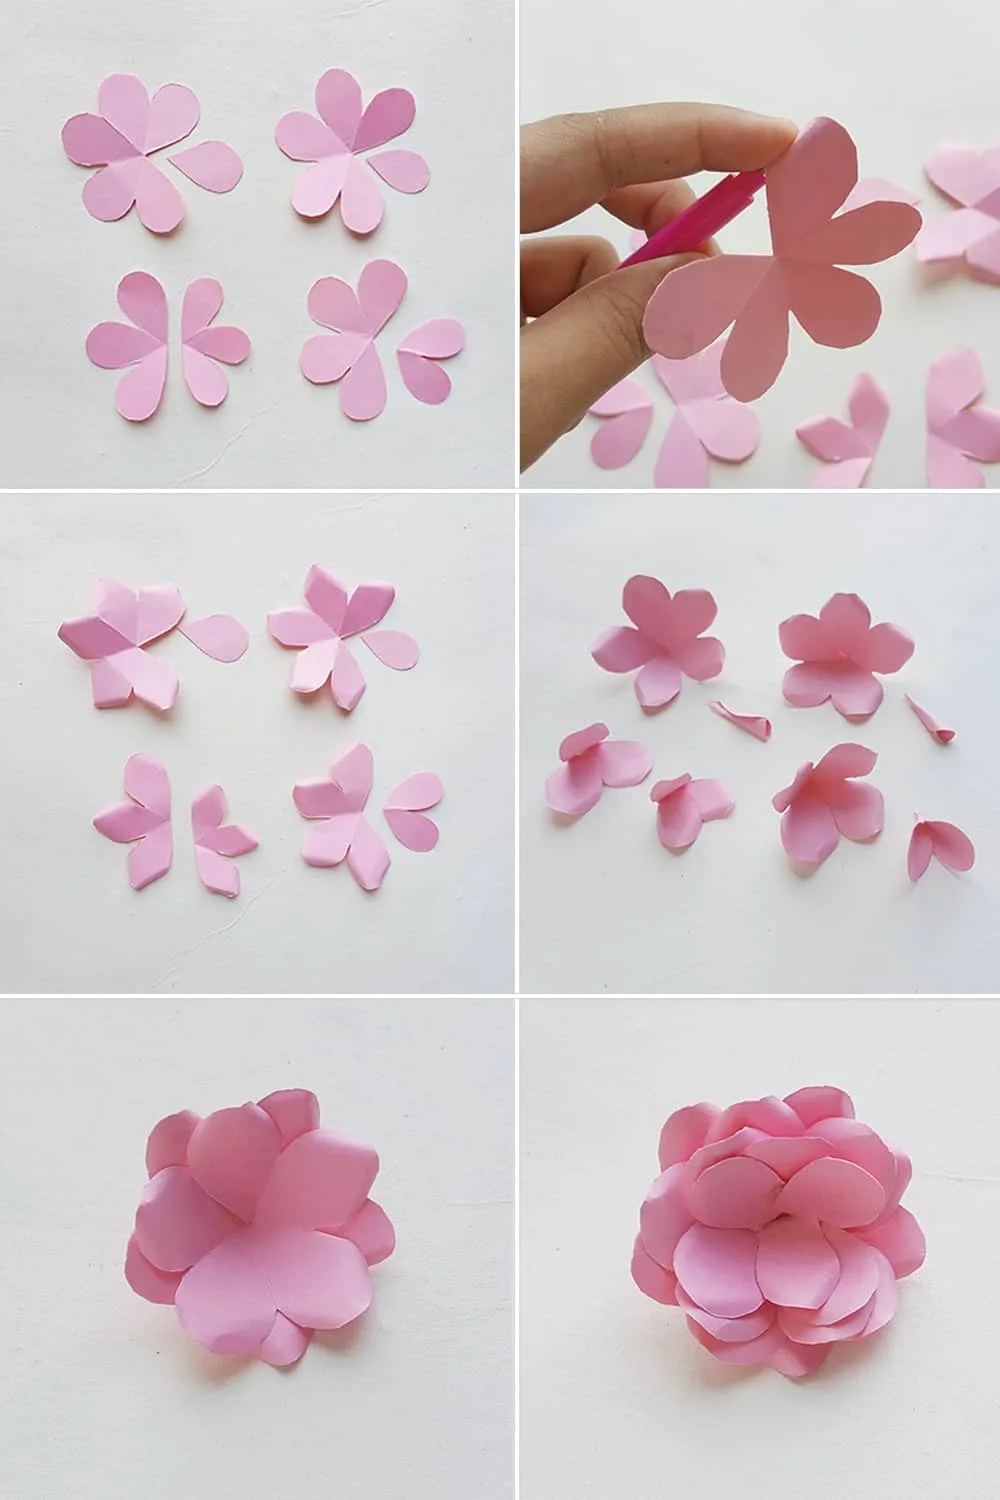 Make a lovely DIY paper rose wreath - perfect for Mother's Day or spring decor!